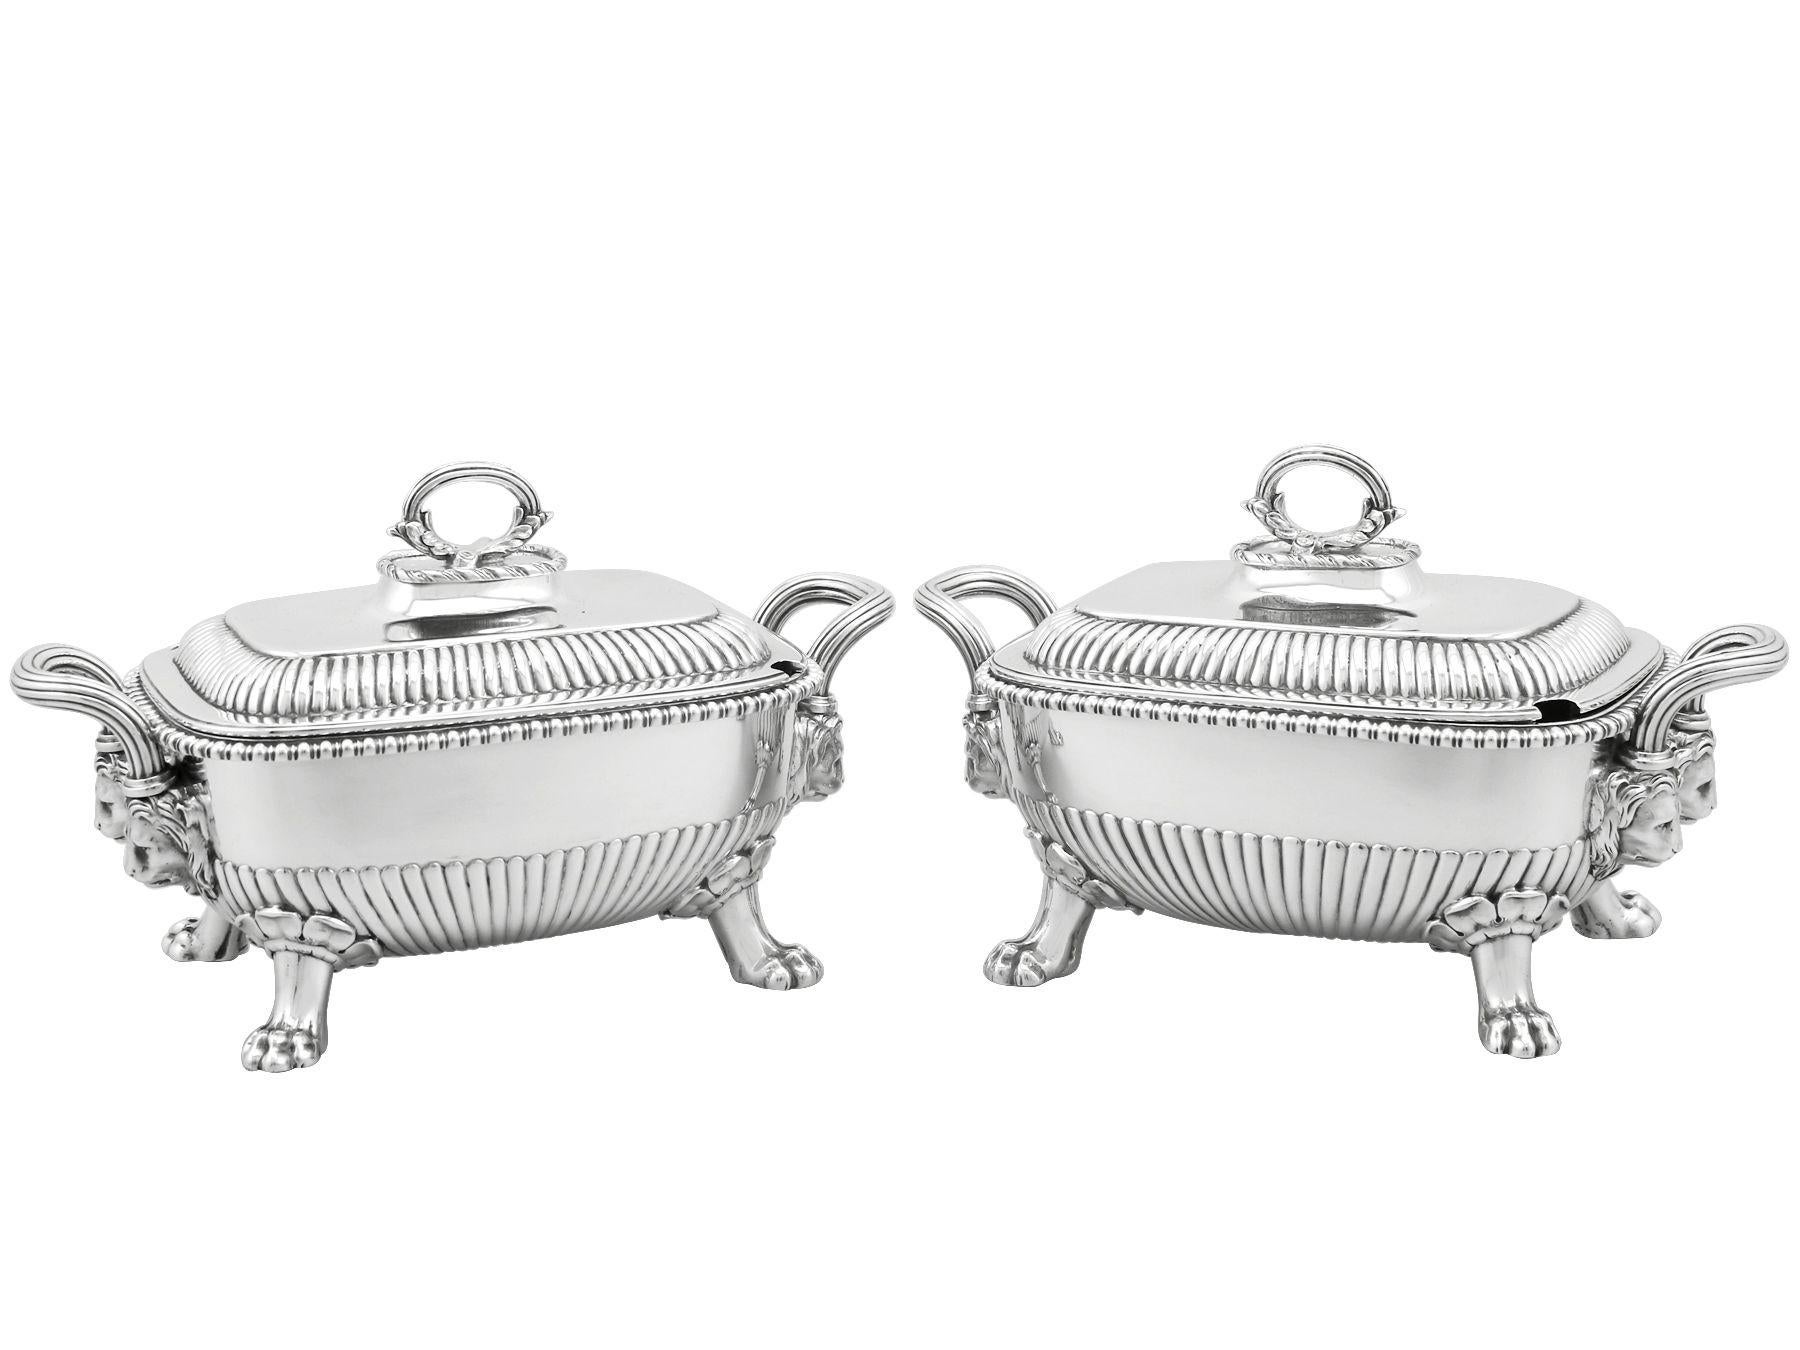 A magnificent, fine and impressive pair of antique George III English sterling silver sauce tureens; an addition to our Georgian silverware collection.

These magnificent antique George III sterling silver sauce tureens have a rectangular rounded